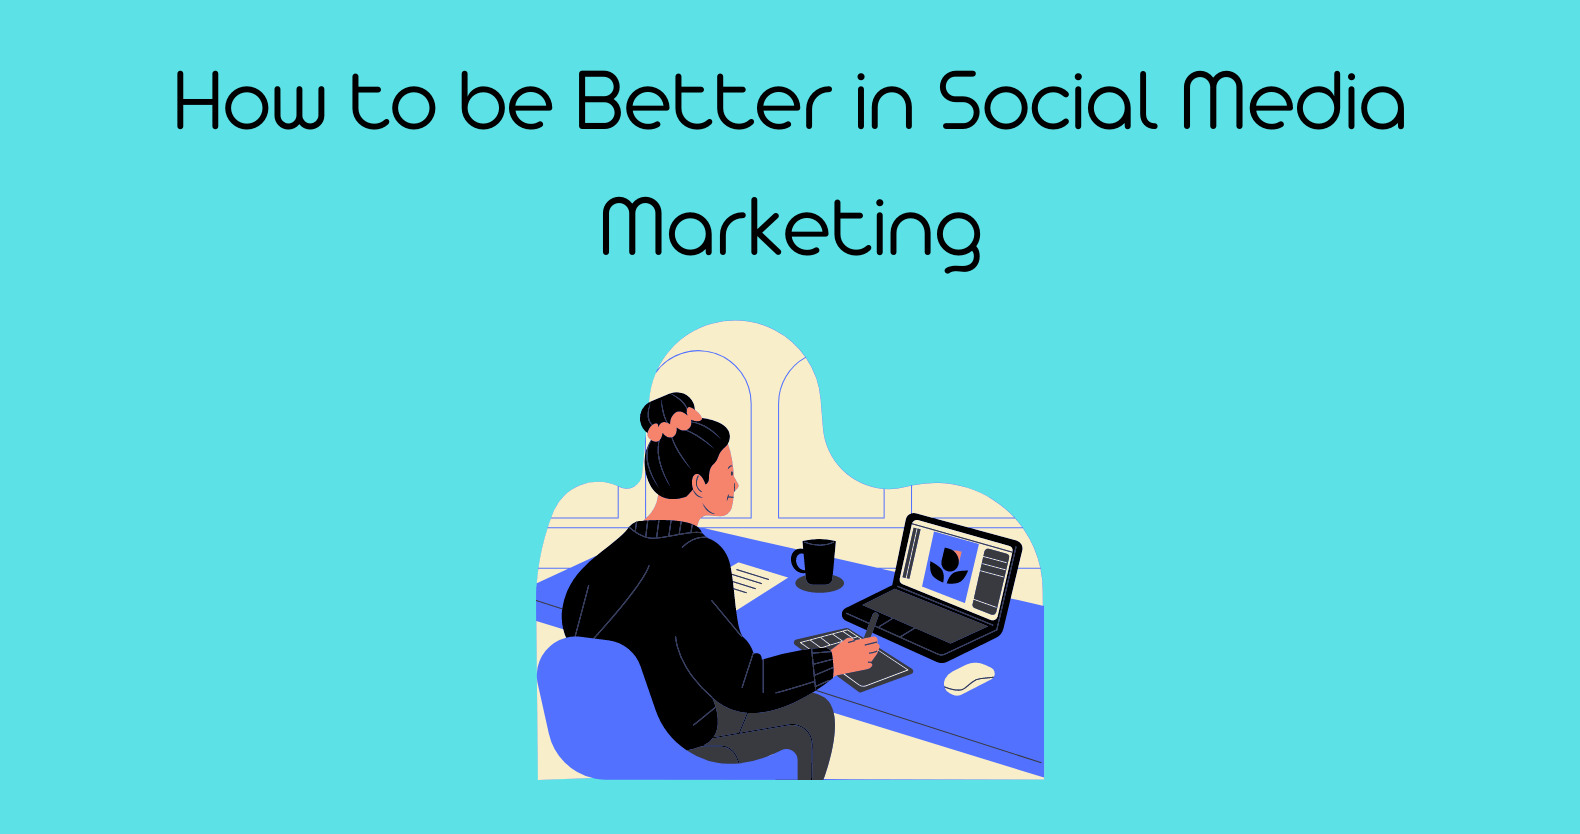 How to be Better in Social Media Marketing (1)